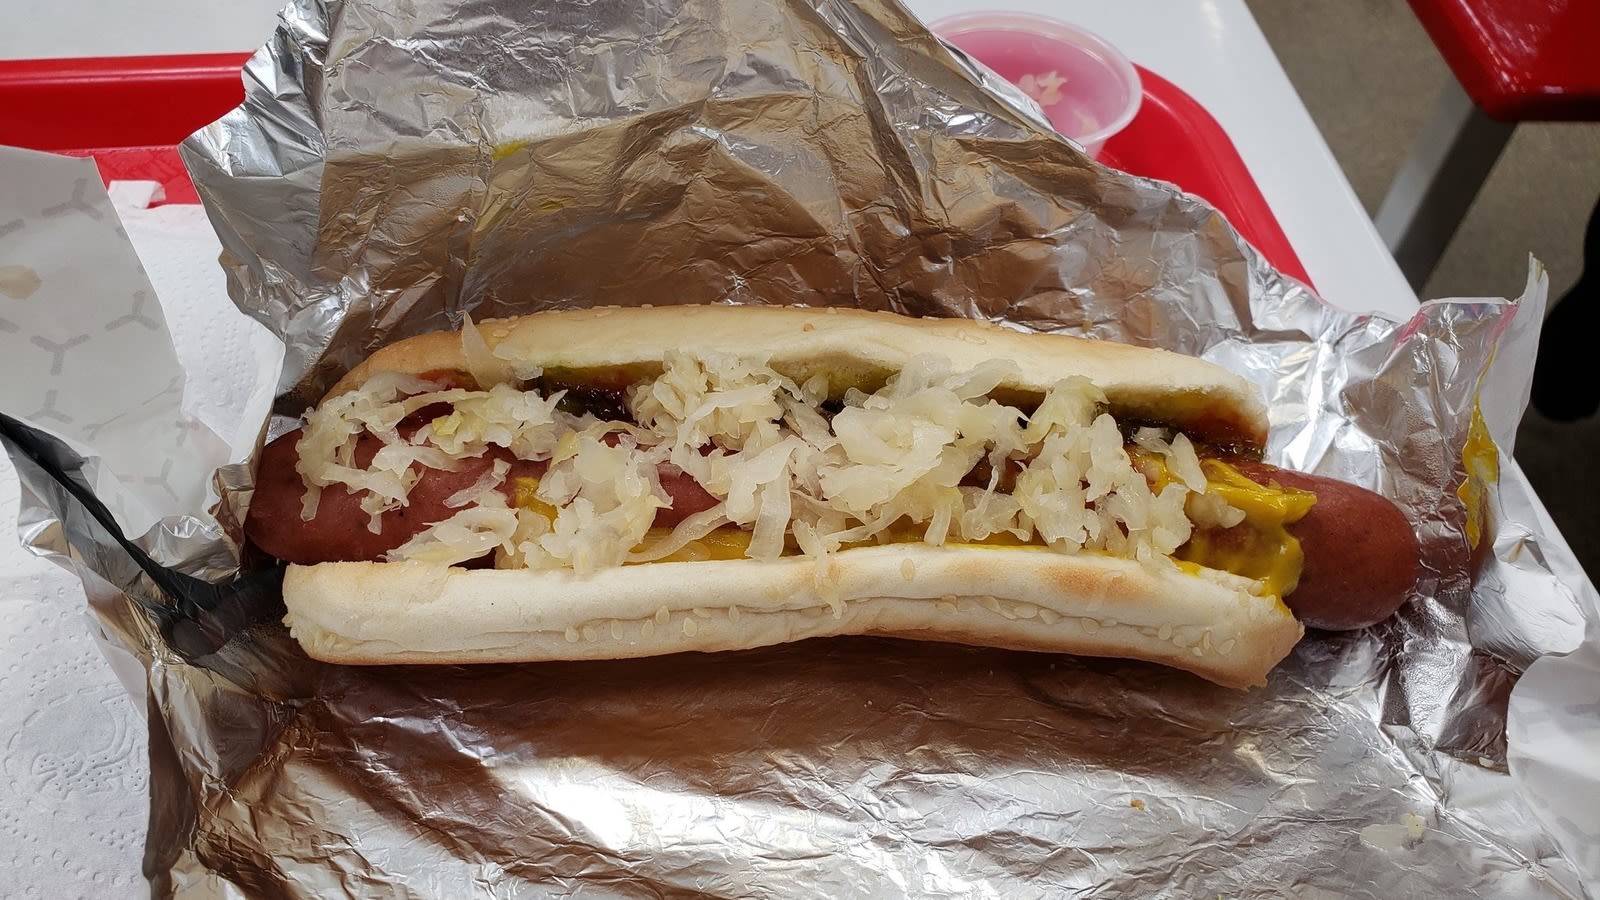 Why Costco Gave Up On Its Other Food Court Hot Dog